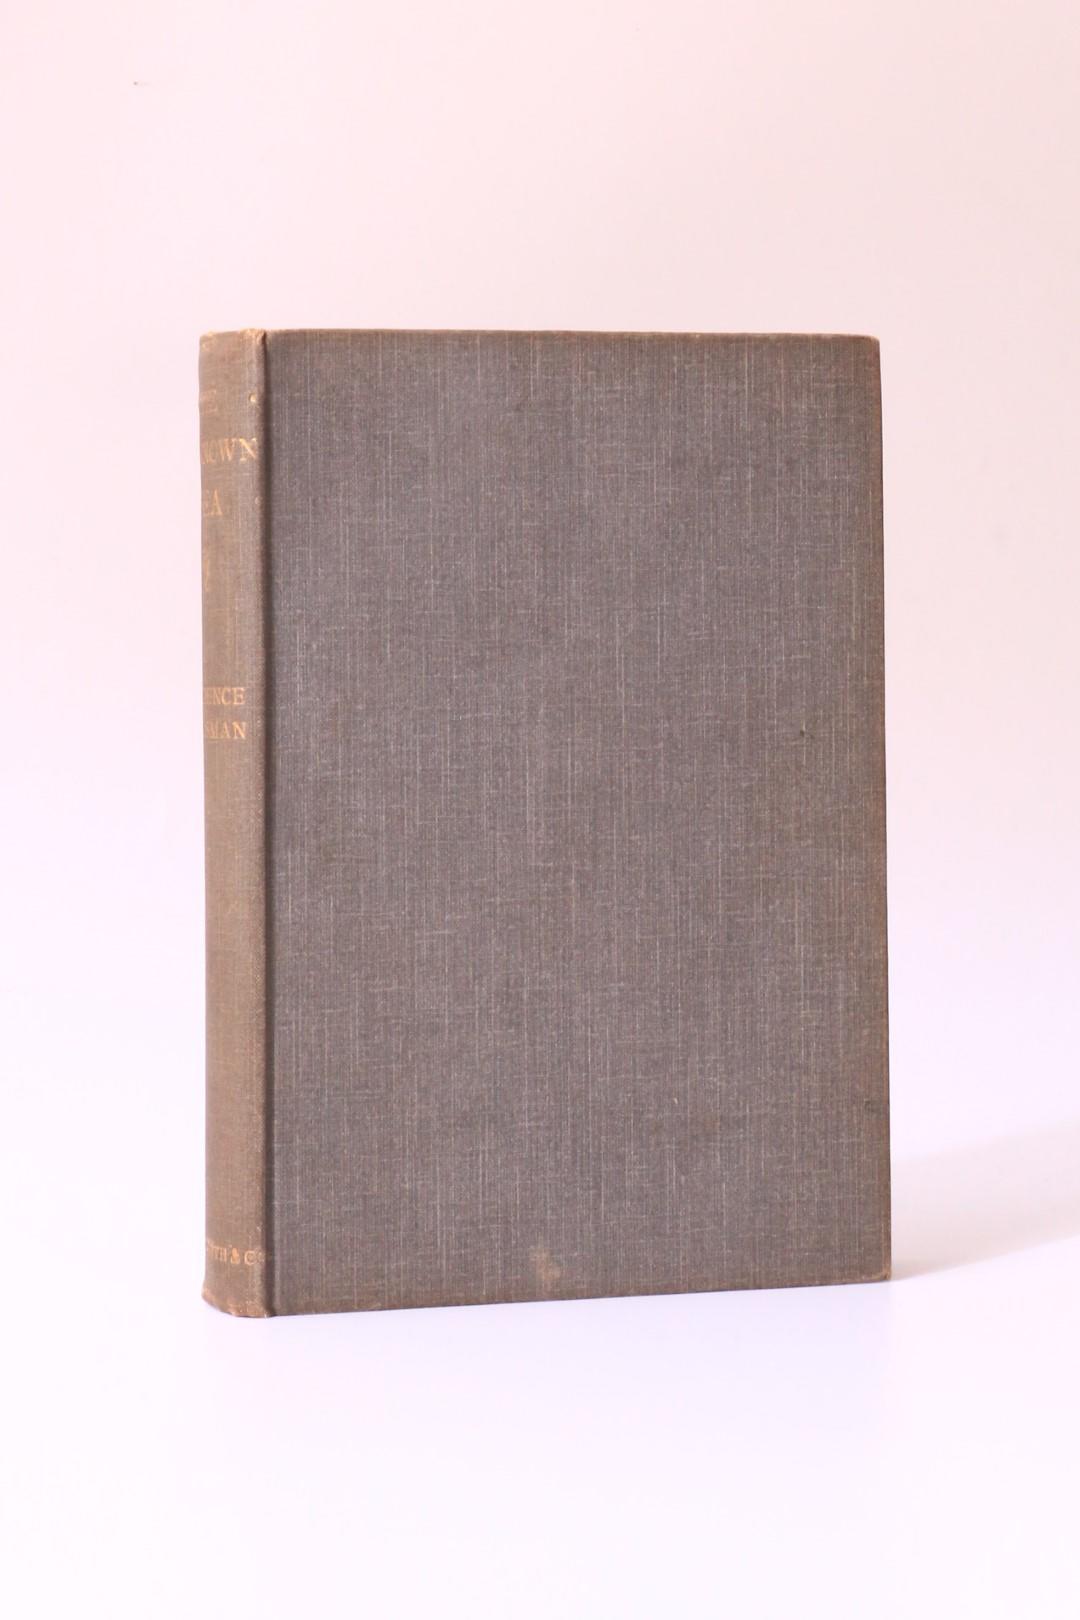 Clemence Housman - The Unknown Sea - Duckworth, 1898, First Edition.